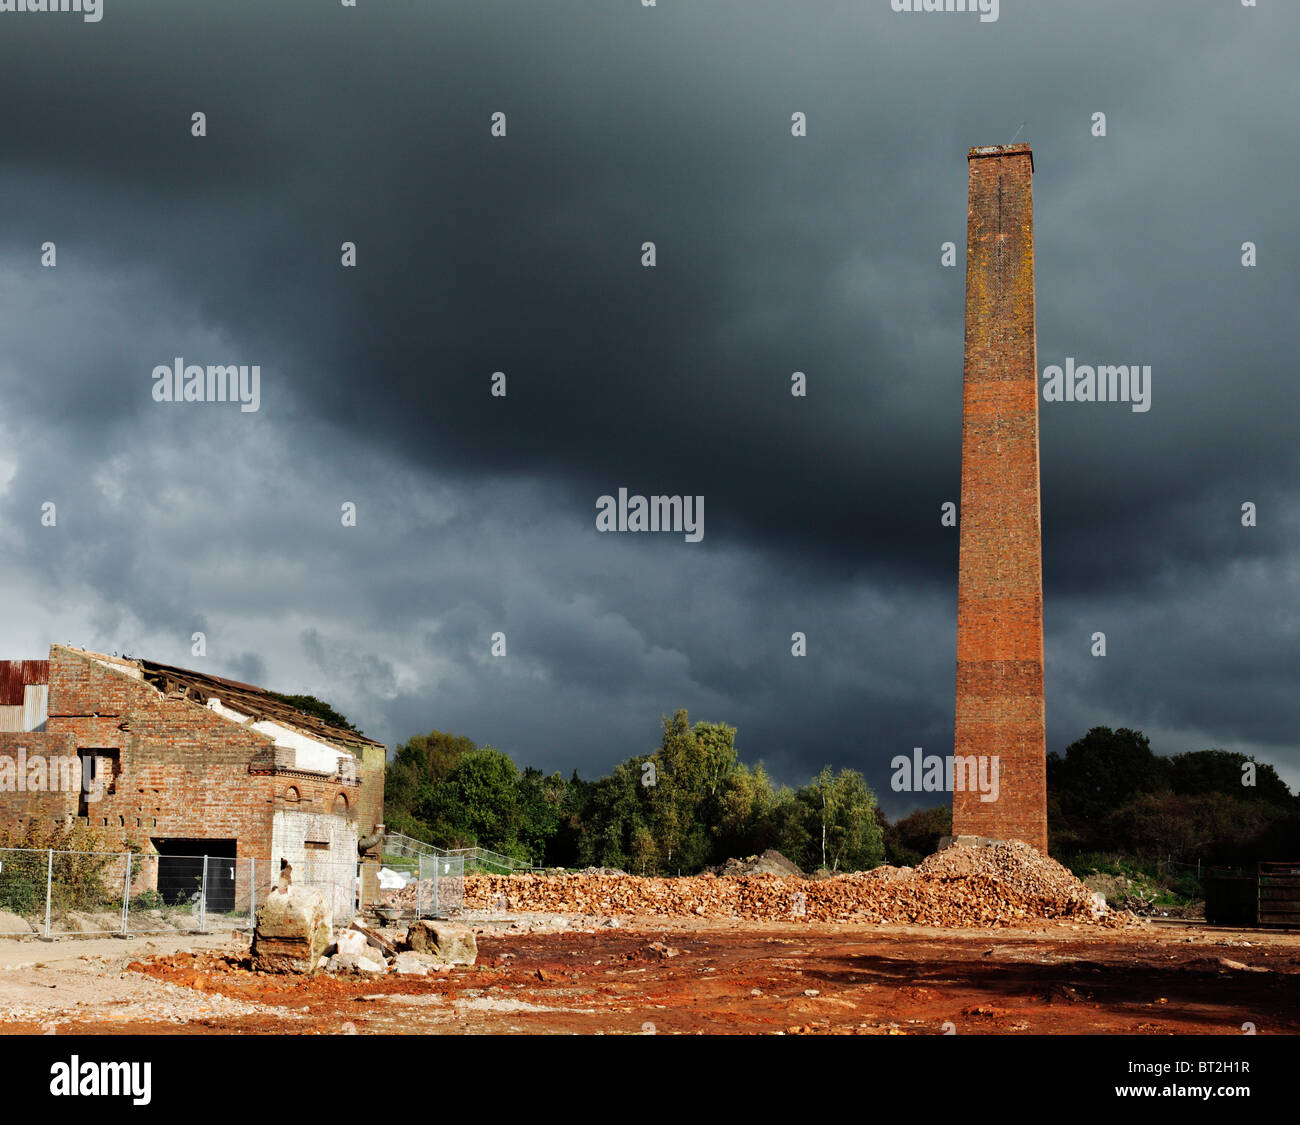 Old industrial chimney stack, prepped for demolition. Stock Photo